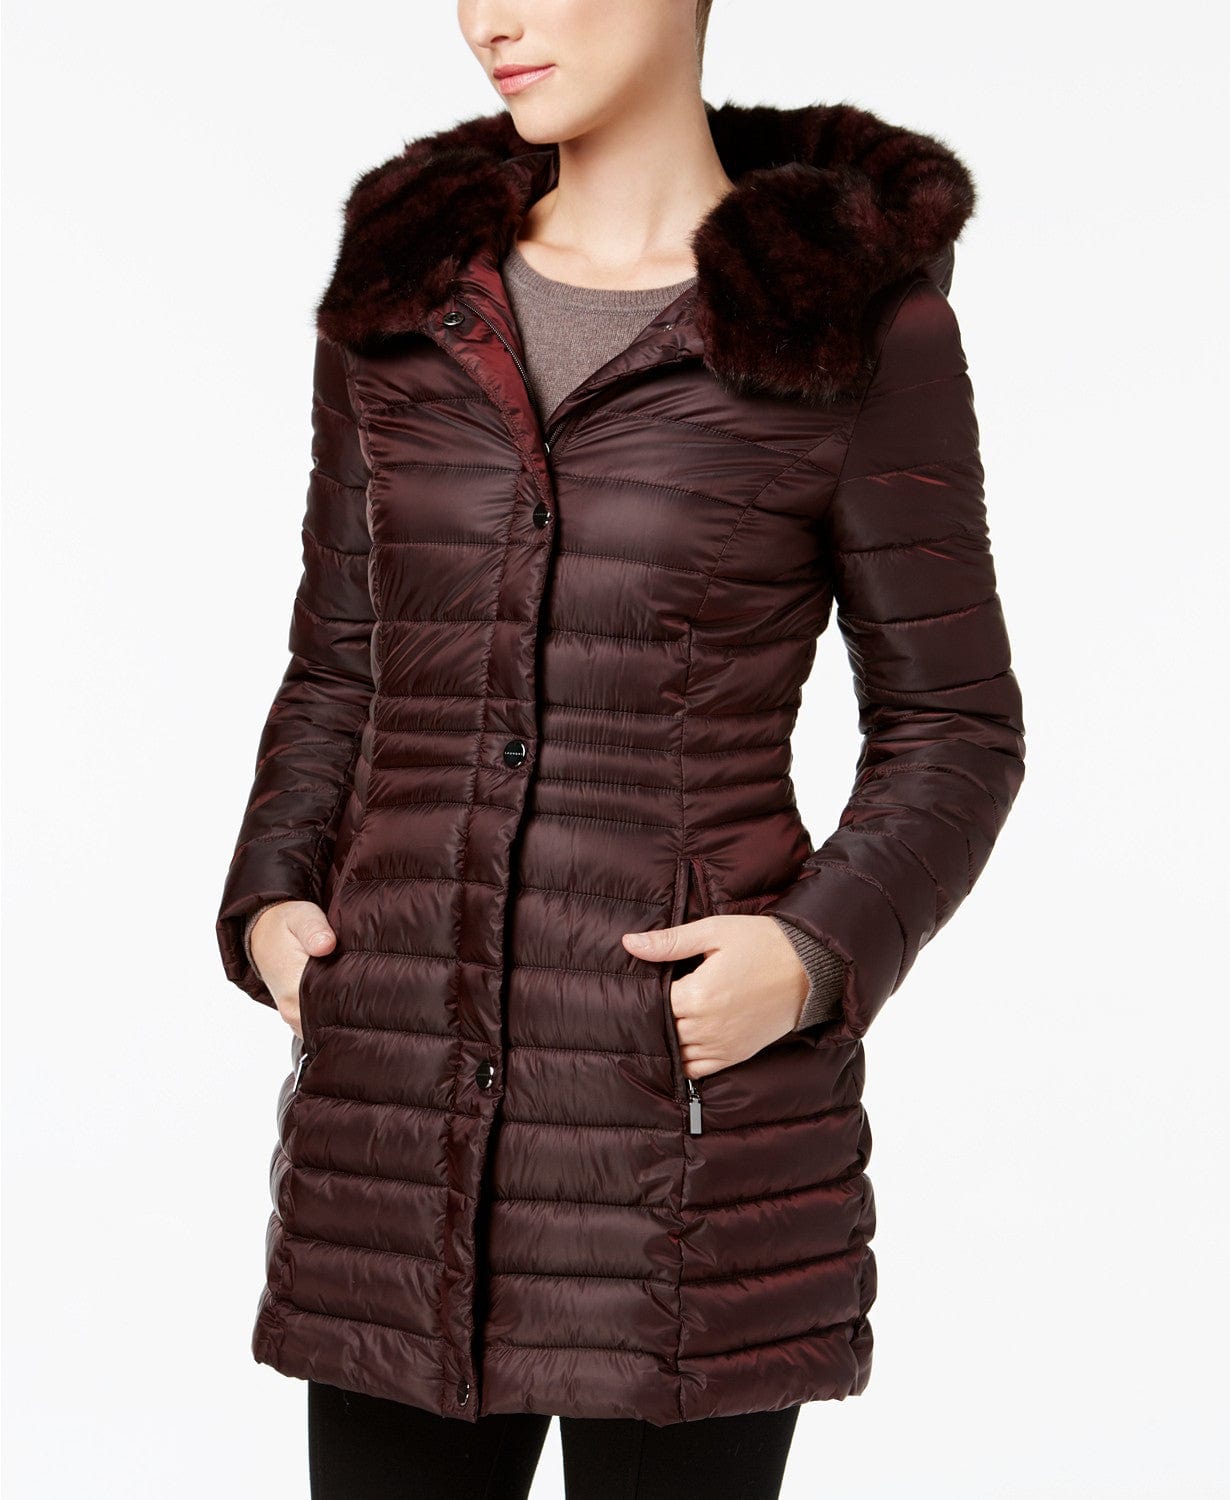 Laundry Black Iridescent Puffer Coat Mid Length Medium - The Pink Pigs, A Compassionate Boutique